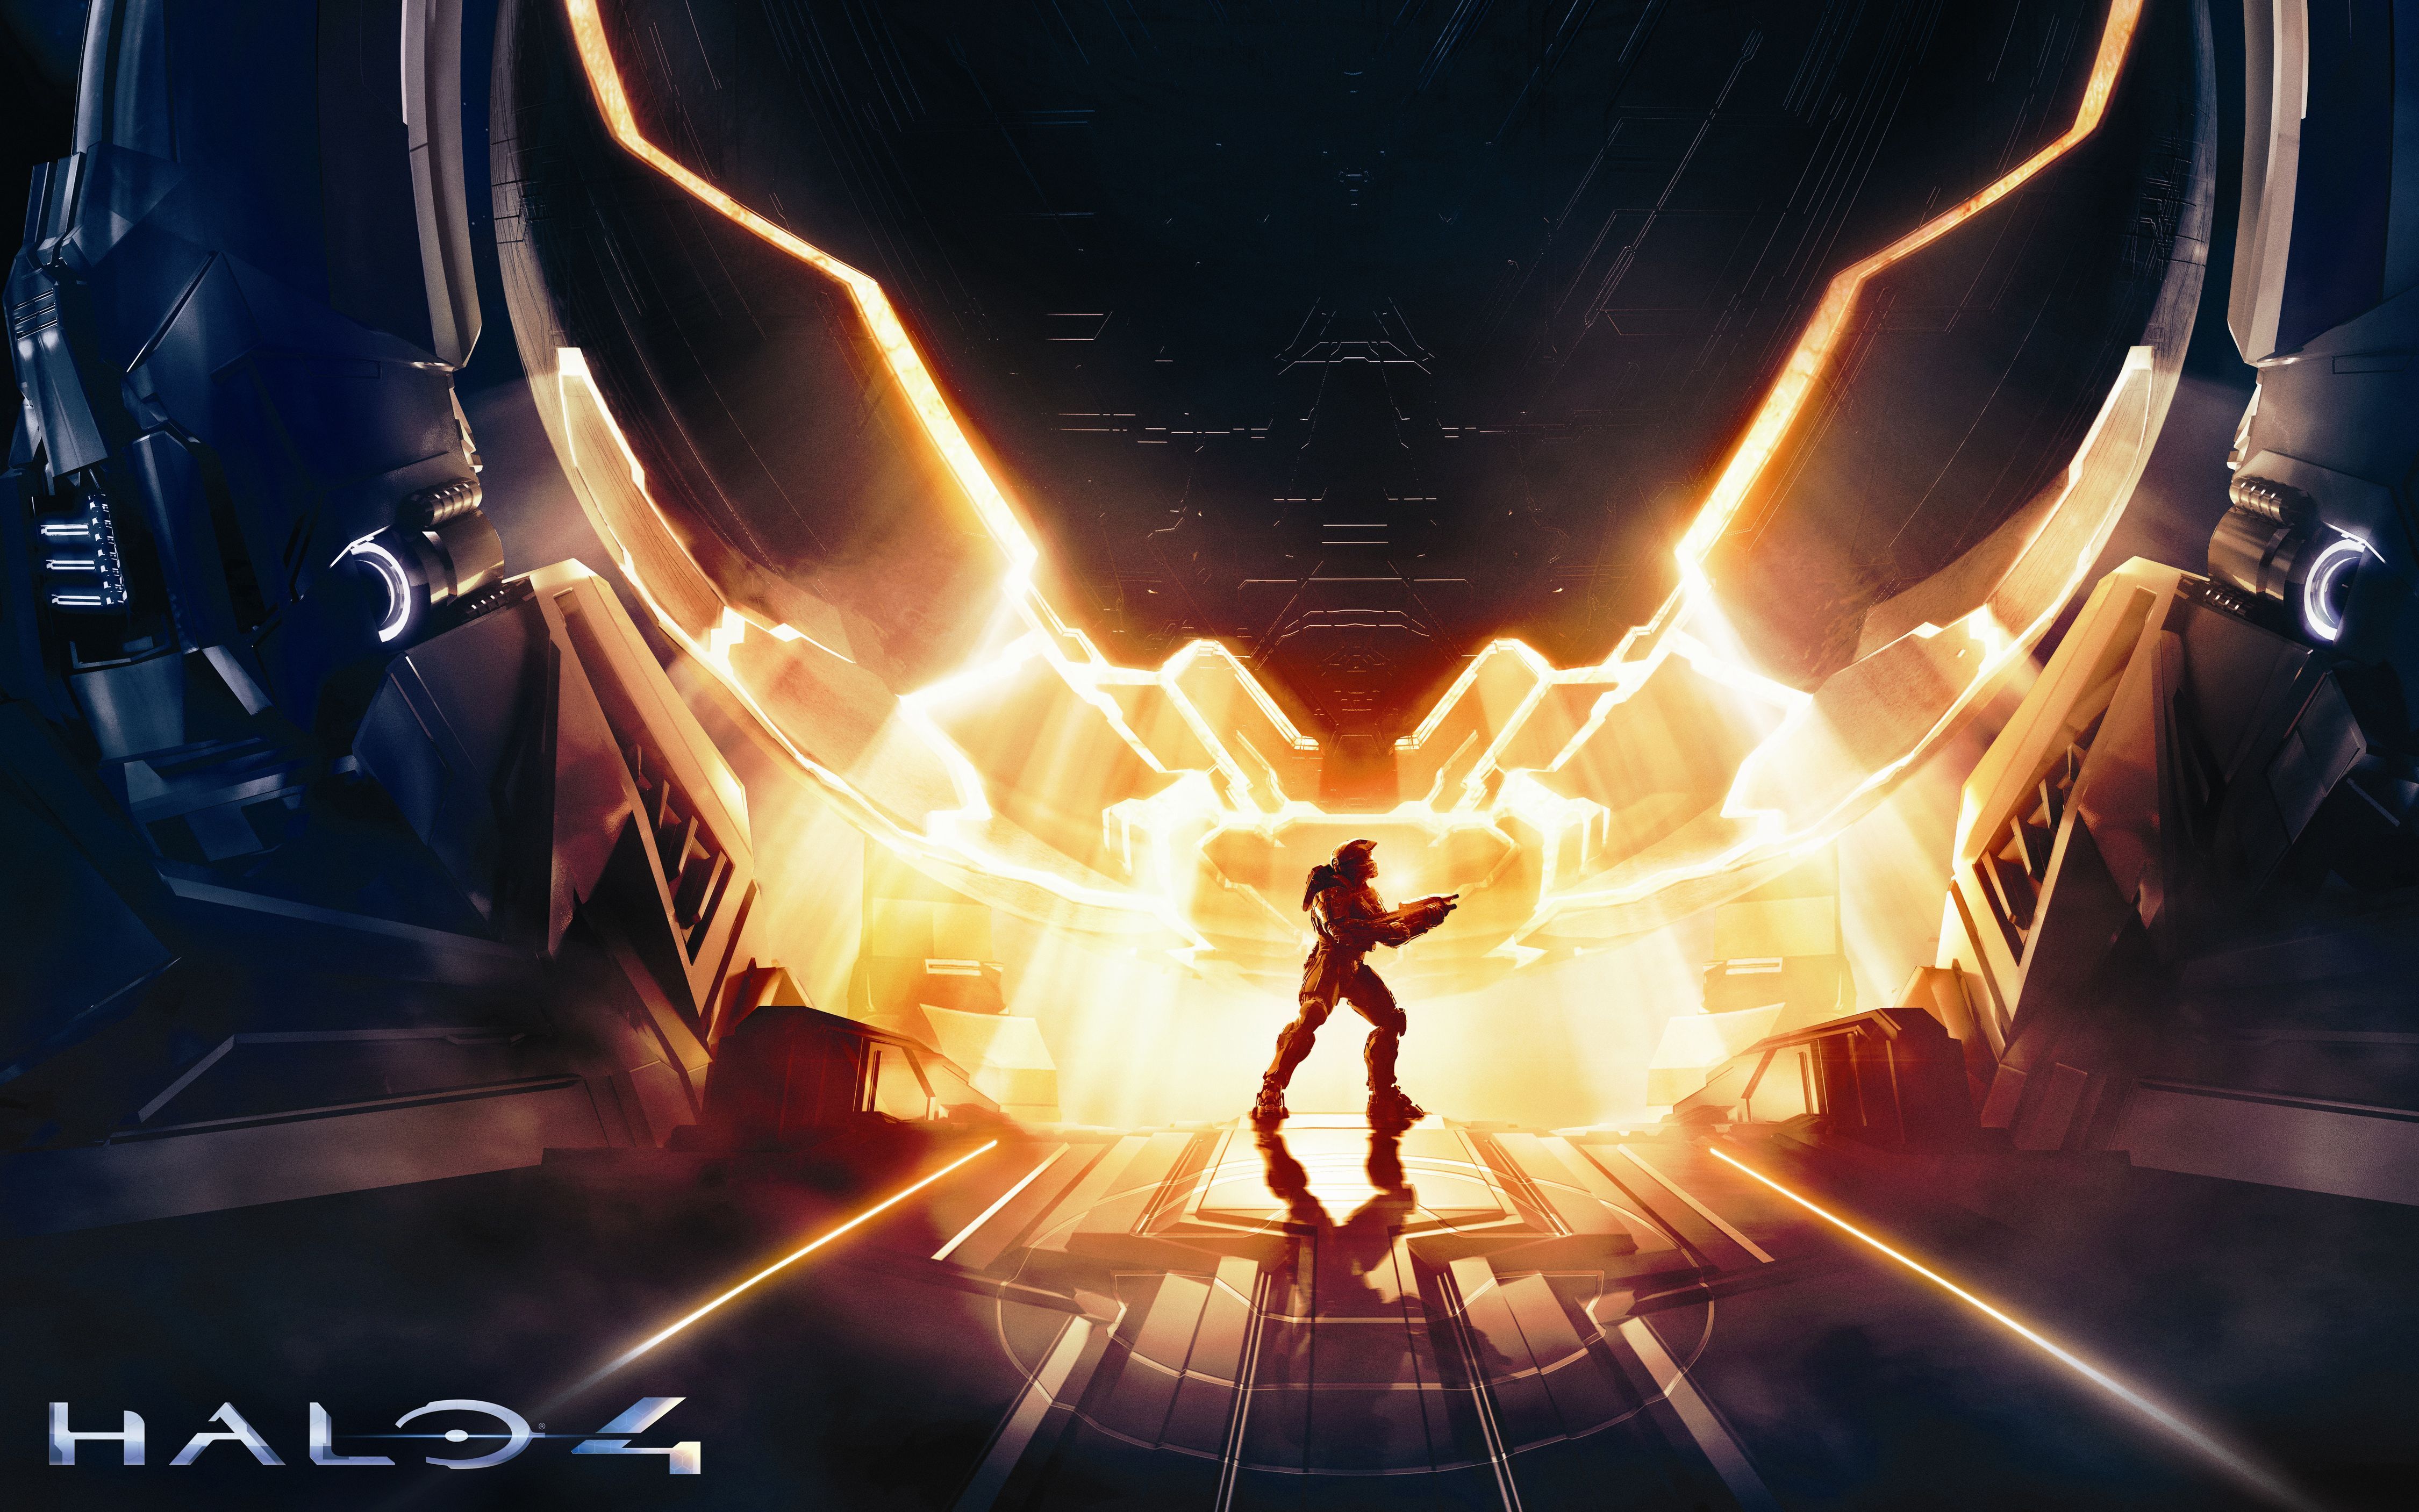 Halo 4 Xbox 360 Game Wallpapers | HD Wallpapers